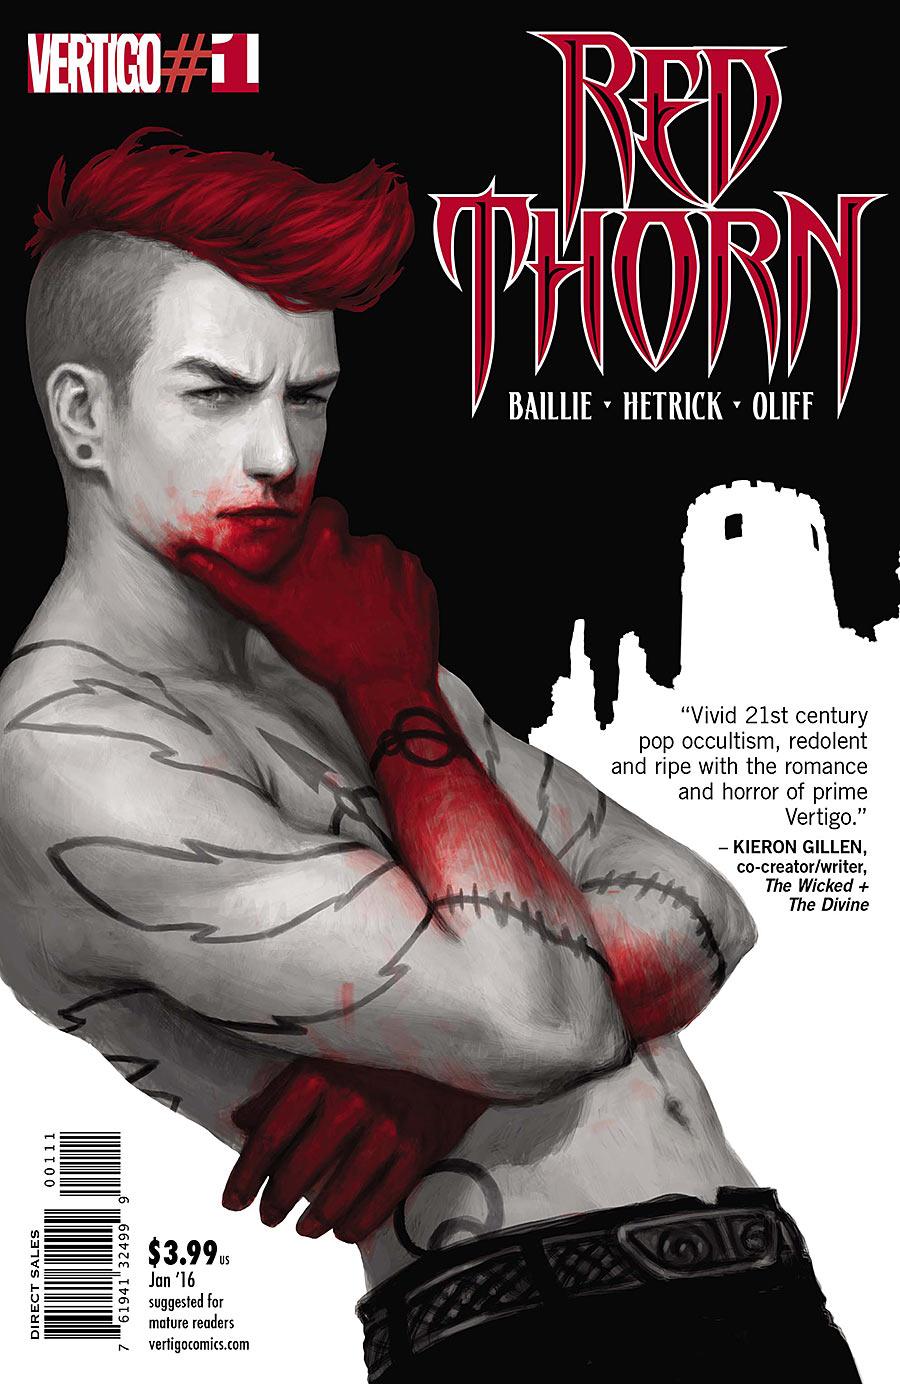 Red Thorn Vol. 1 #1